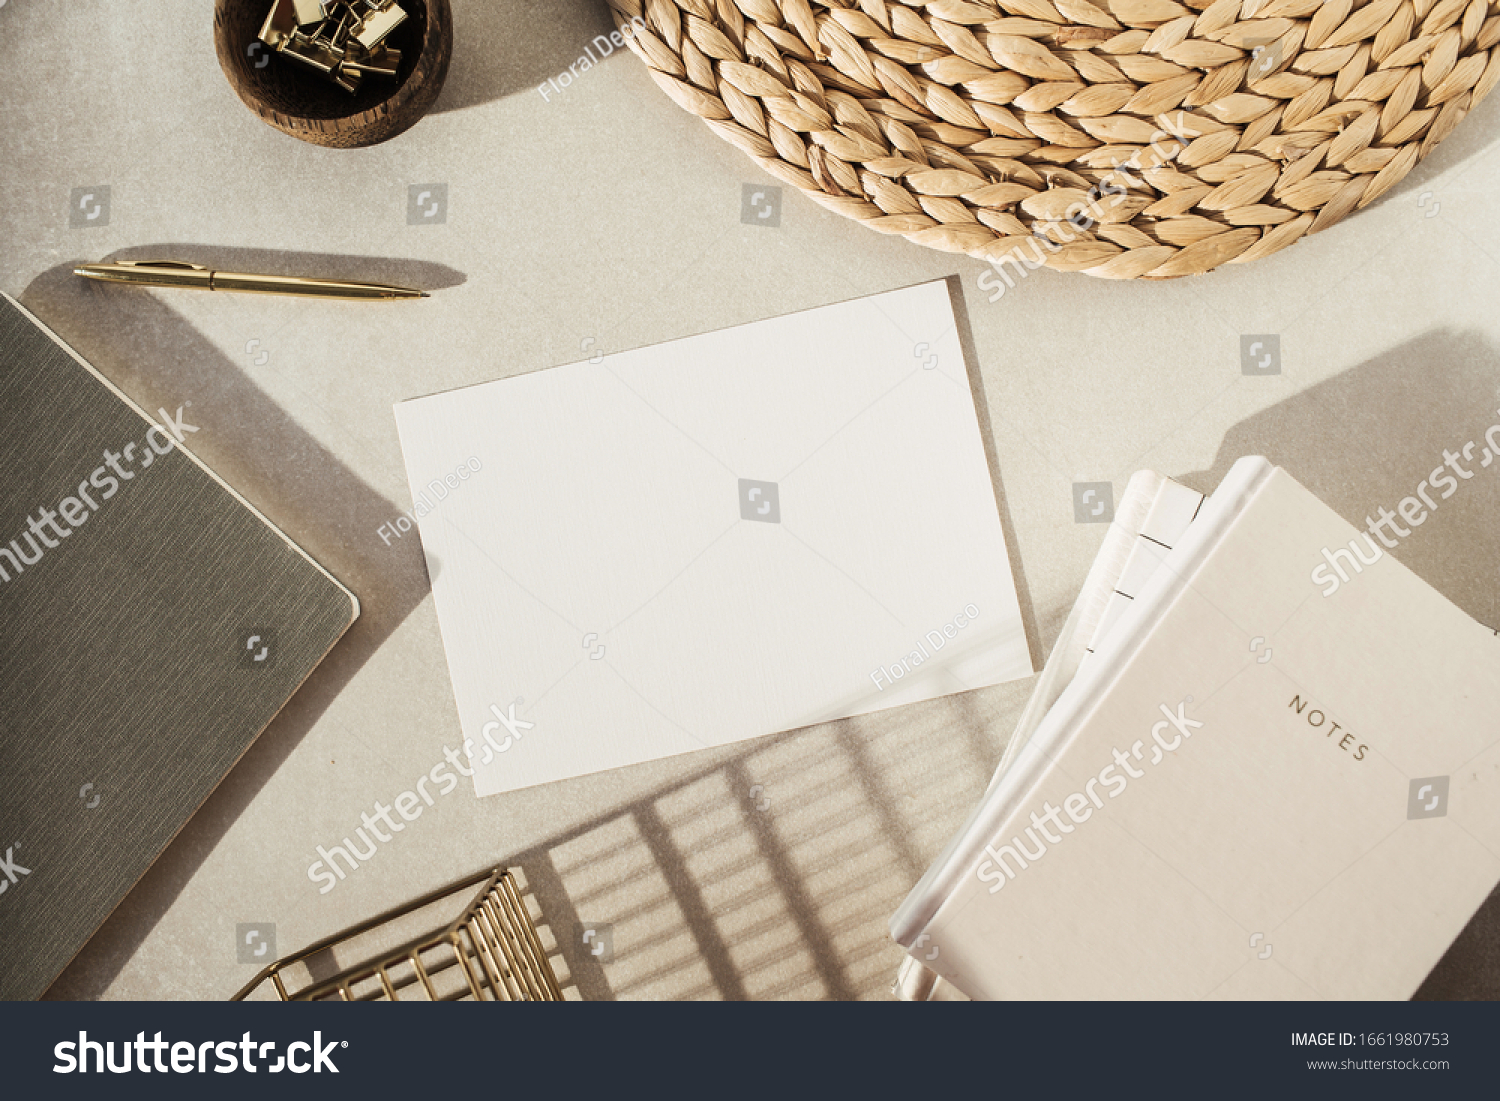 Flatlay blank paper sheet, notebooks, clips in wooden bowl, straw stand on beige concrete background. Home office desk workspace. Business, work template. Flat lay, top view. #1661980753